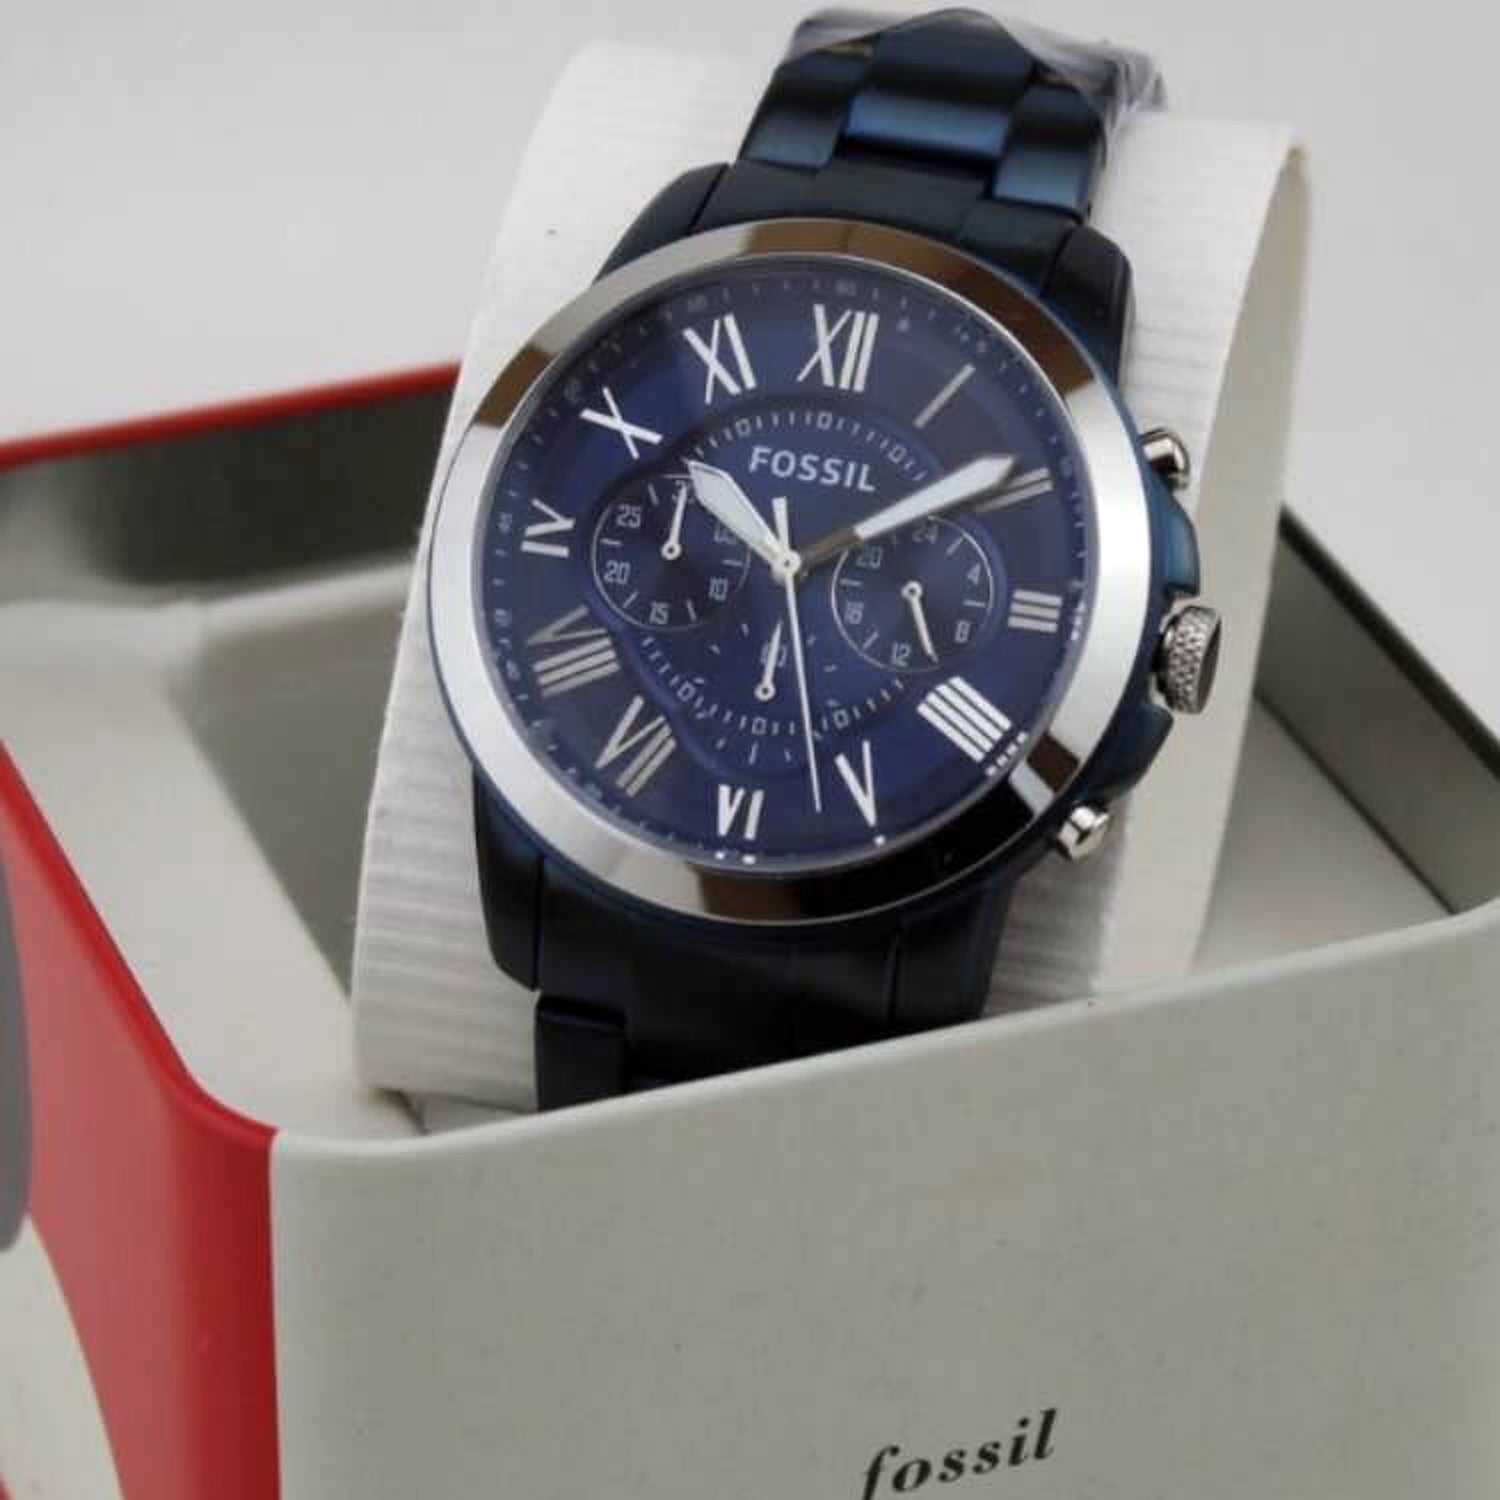 fossil 5230